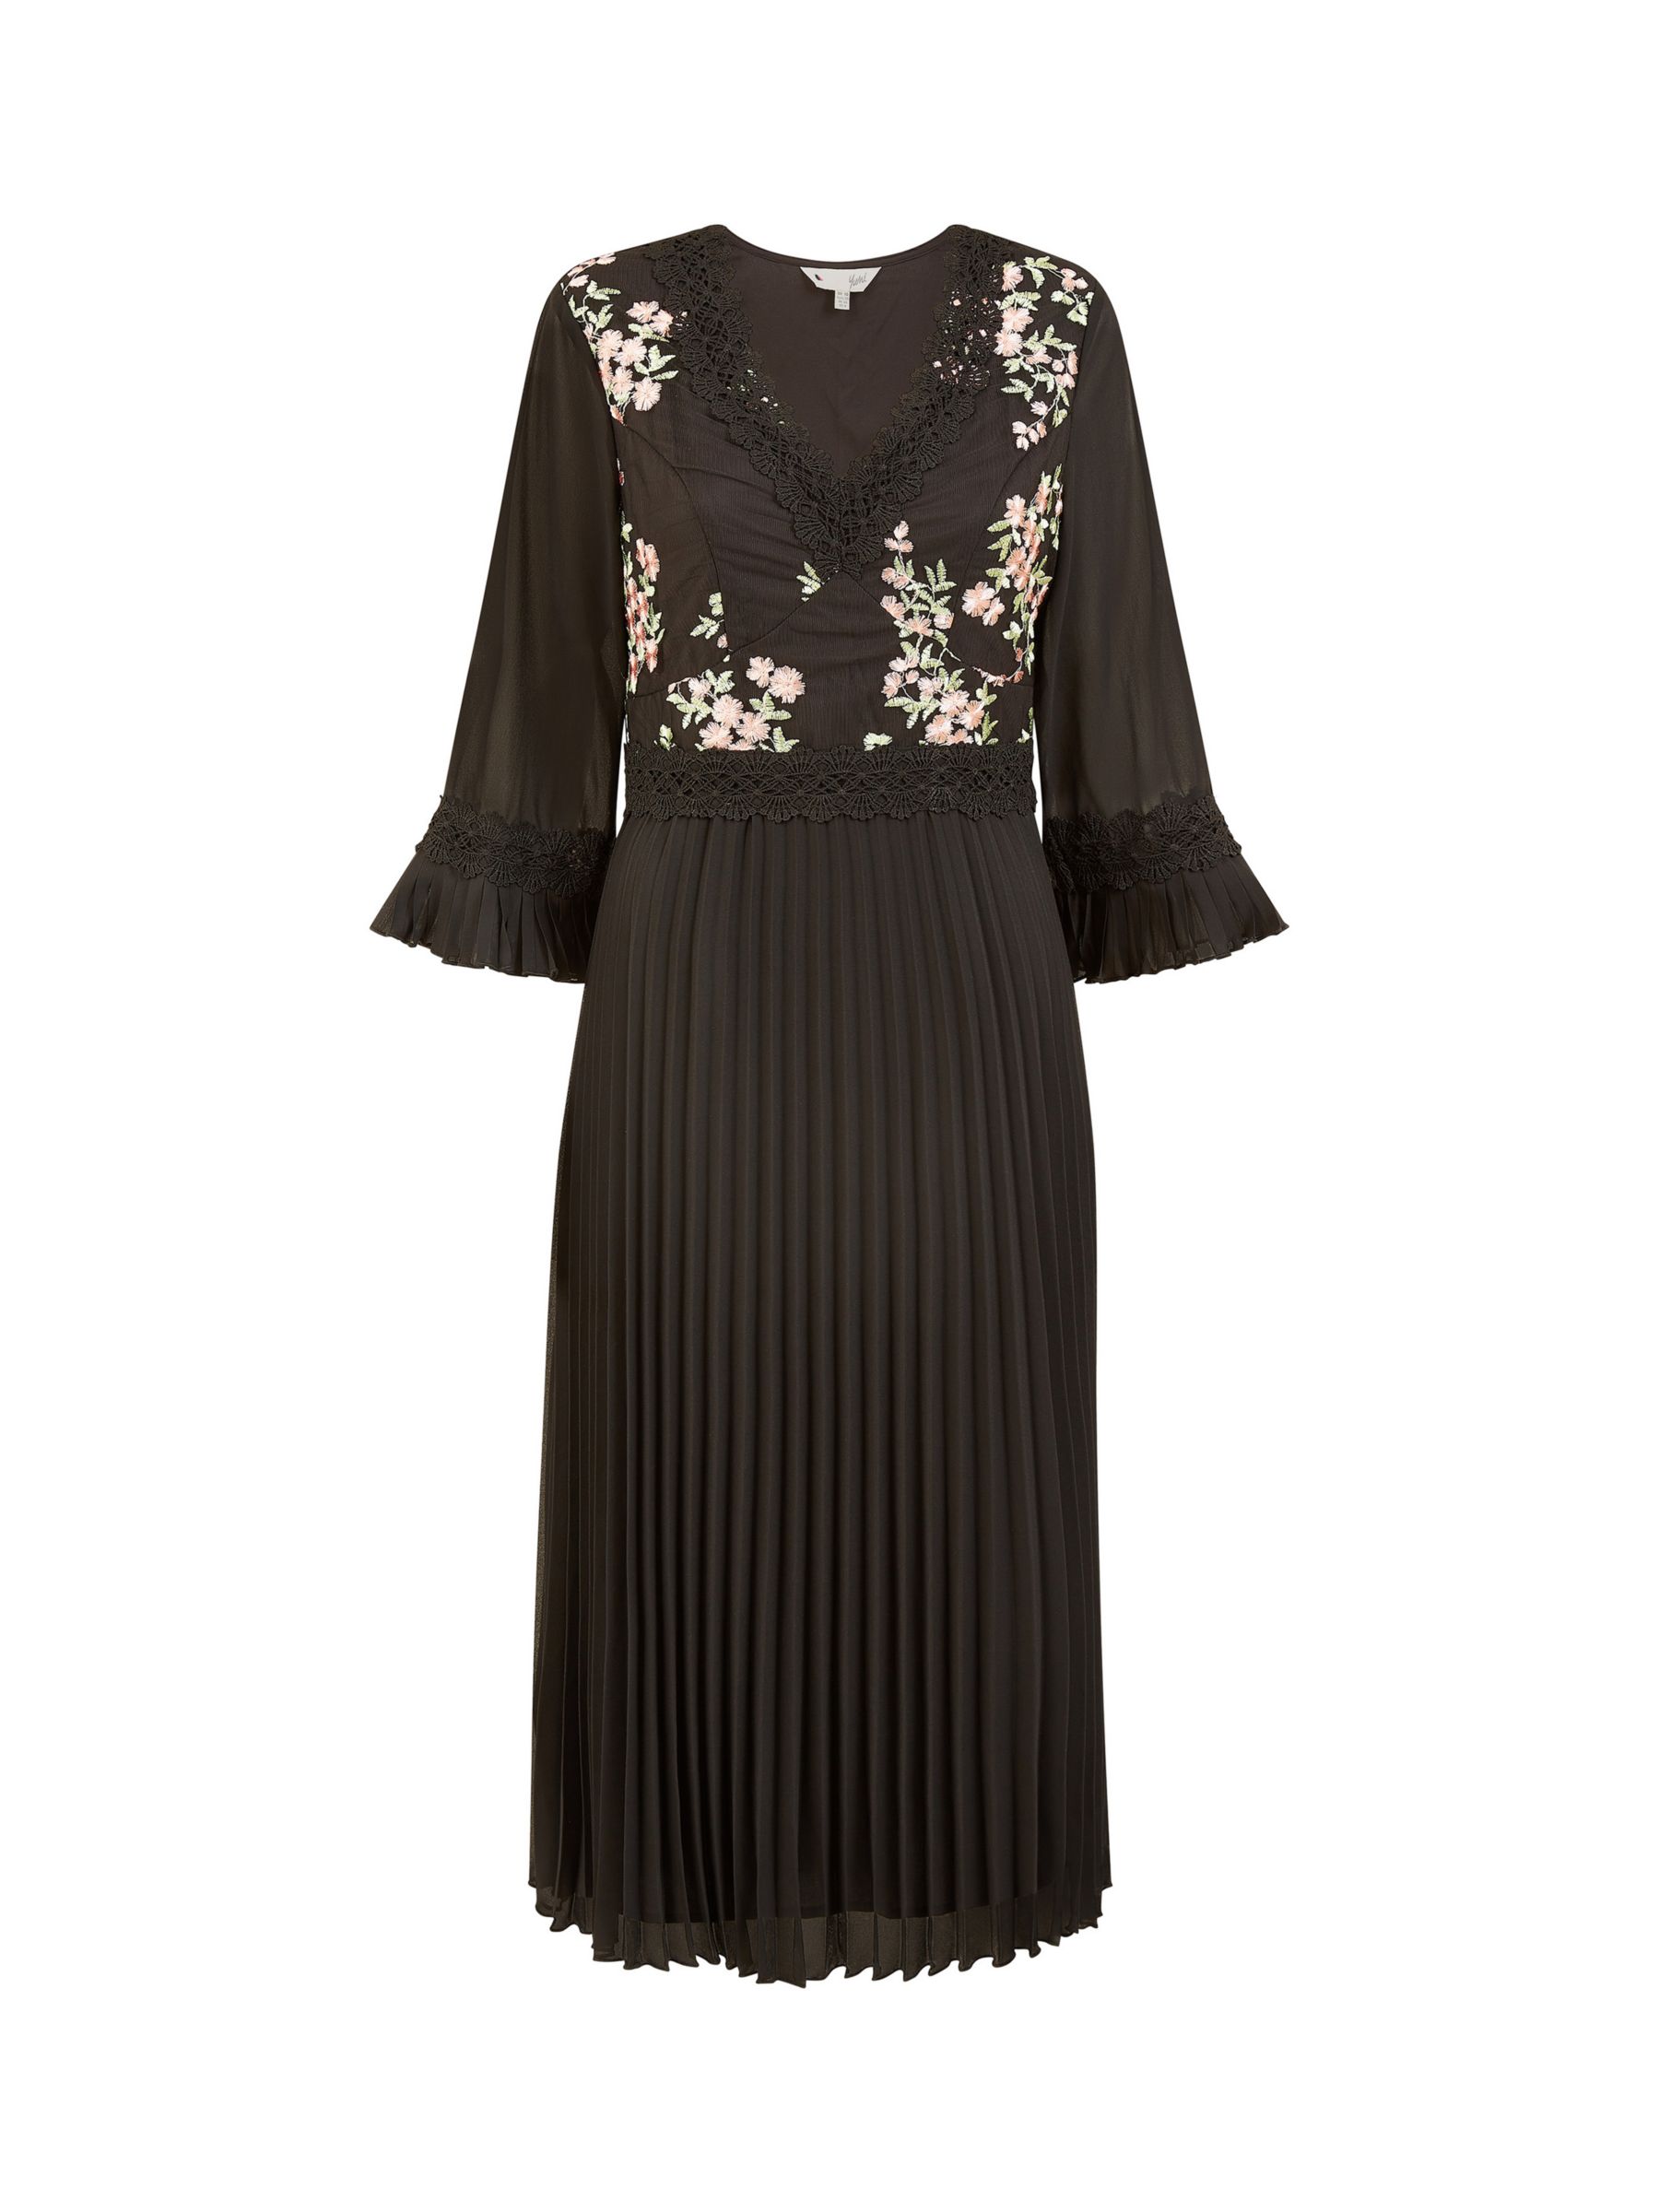 Buy Yumi Embroidered Panel Midi Dress With Pleats, Black/Multi Online at johnlewis.com